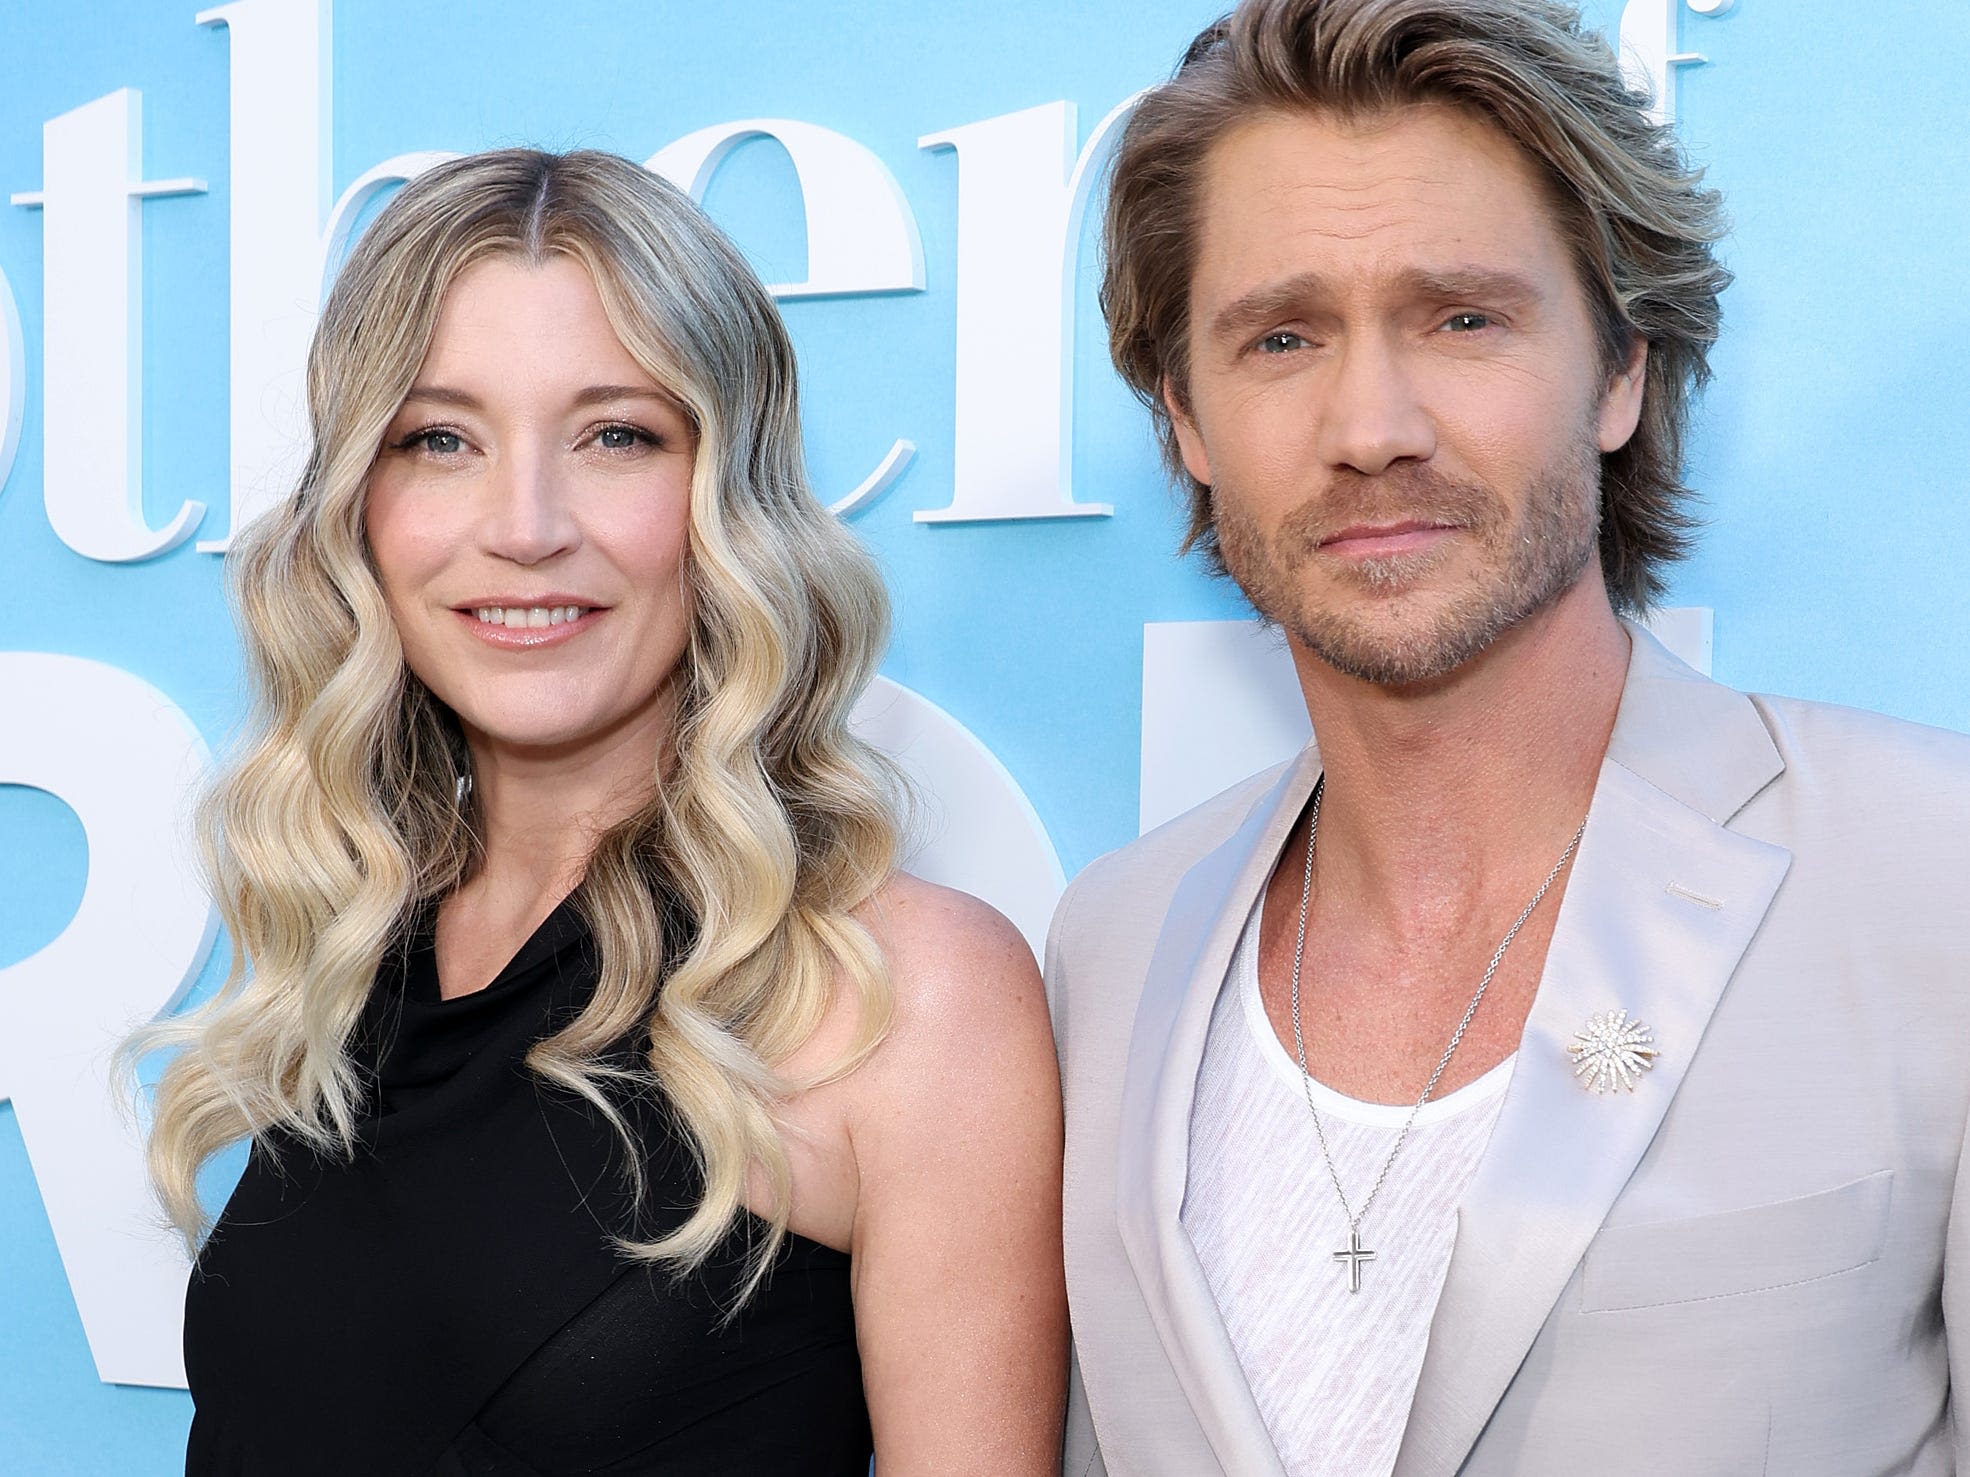 Chad Michael Murray said that parenthood changed his perspective on acting. Here's everything to know about his wife and 3 kids.